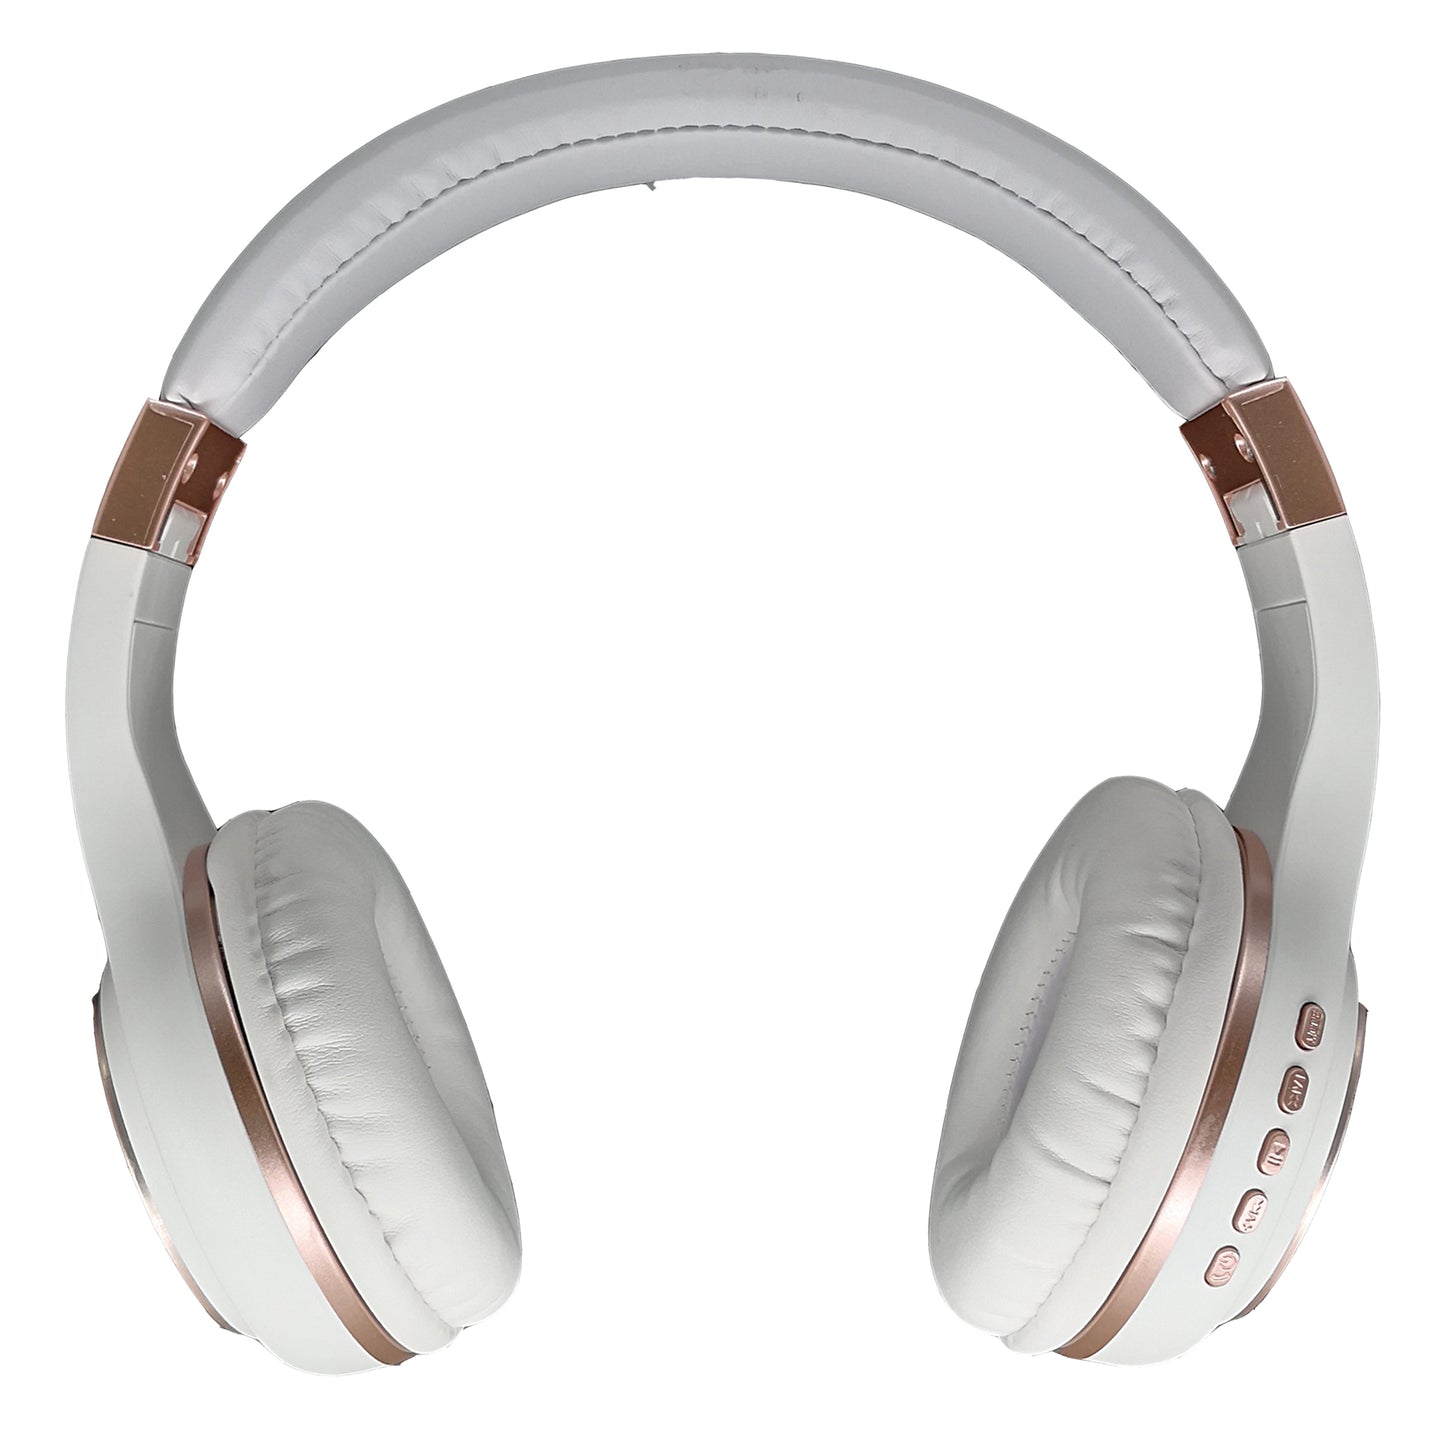 Photo of Morpheus 360 Serenity Wireless Over Ear Headphones shows Power on/off button, Volume control buttons, Play/Pause, and Mode button. White with Rose Gold accents.